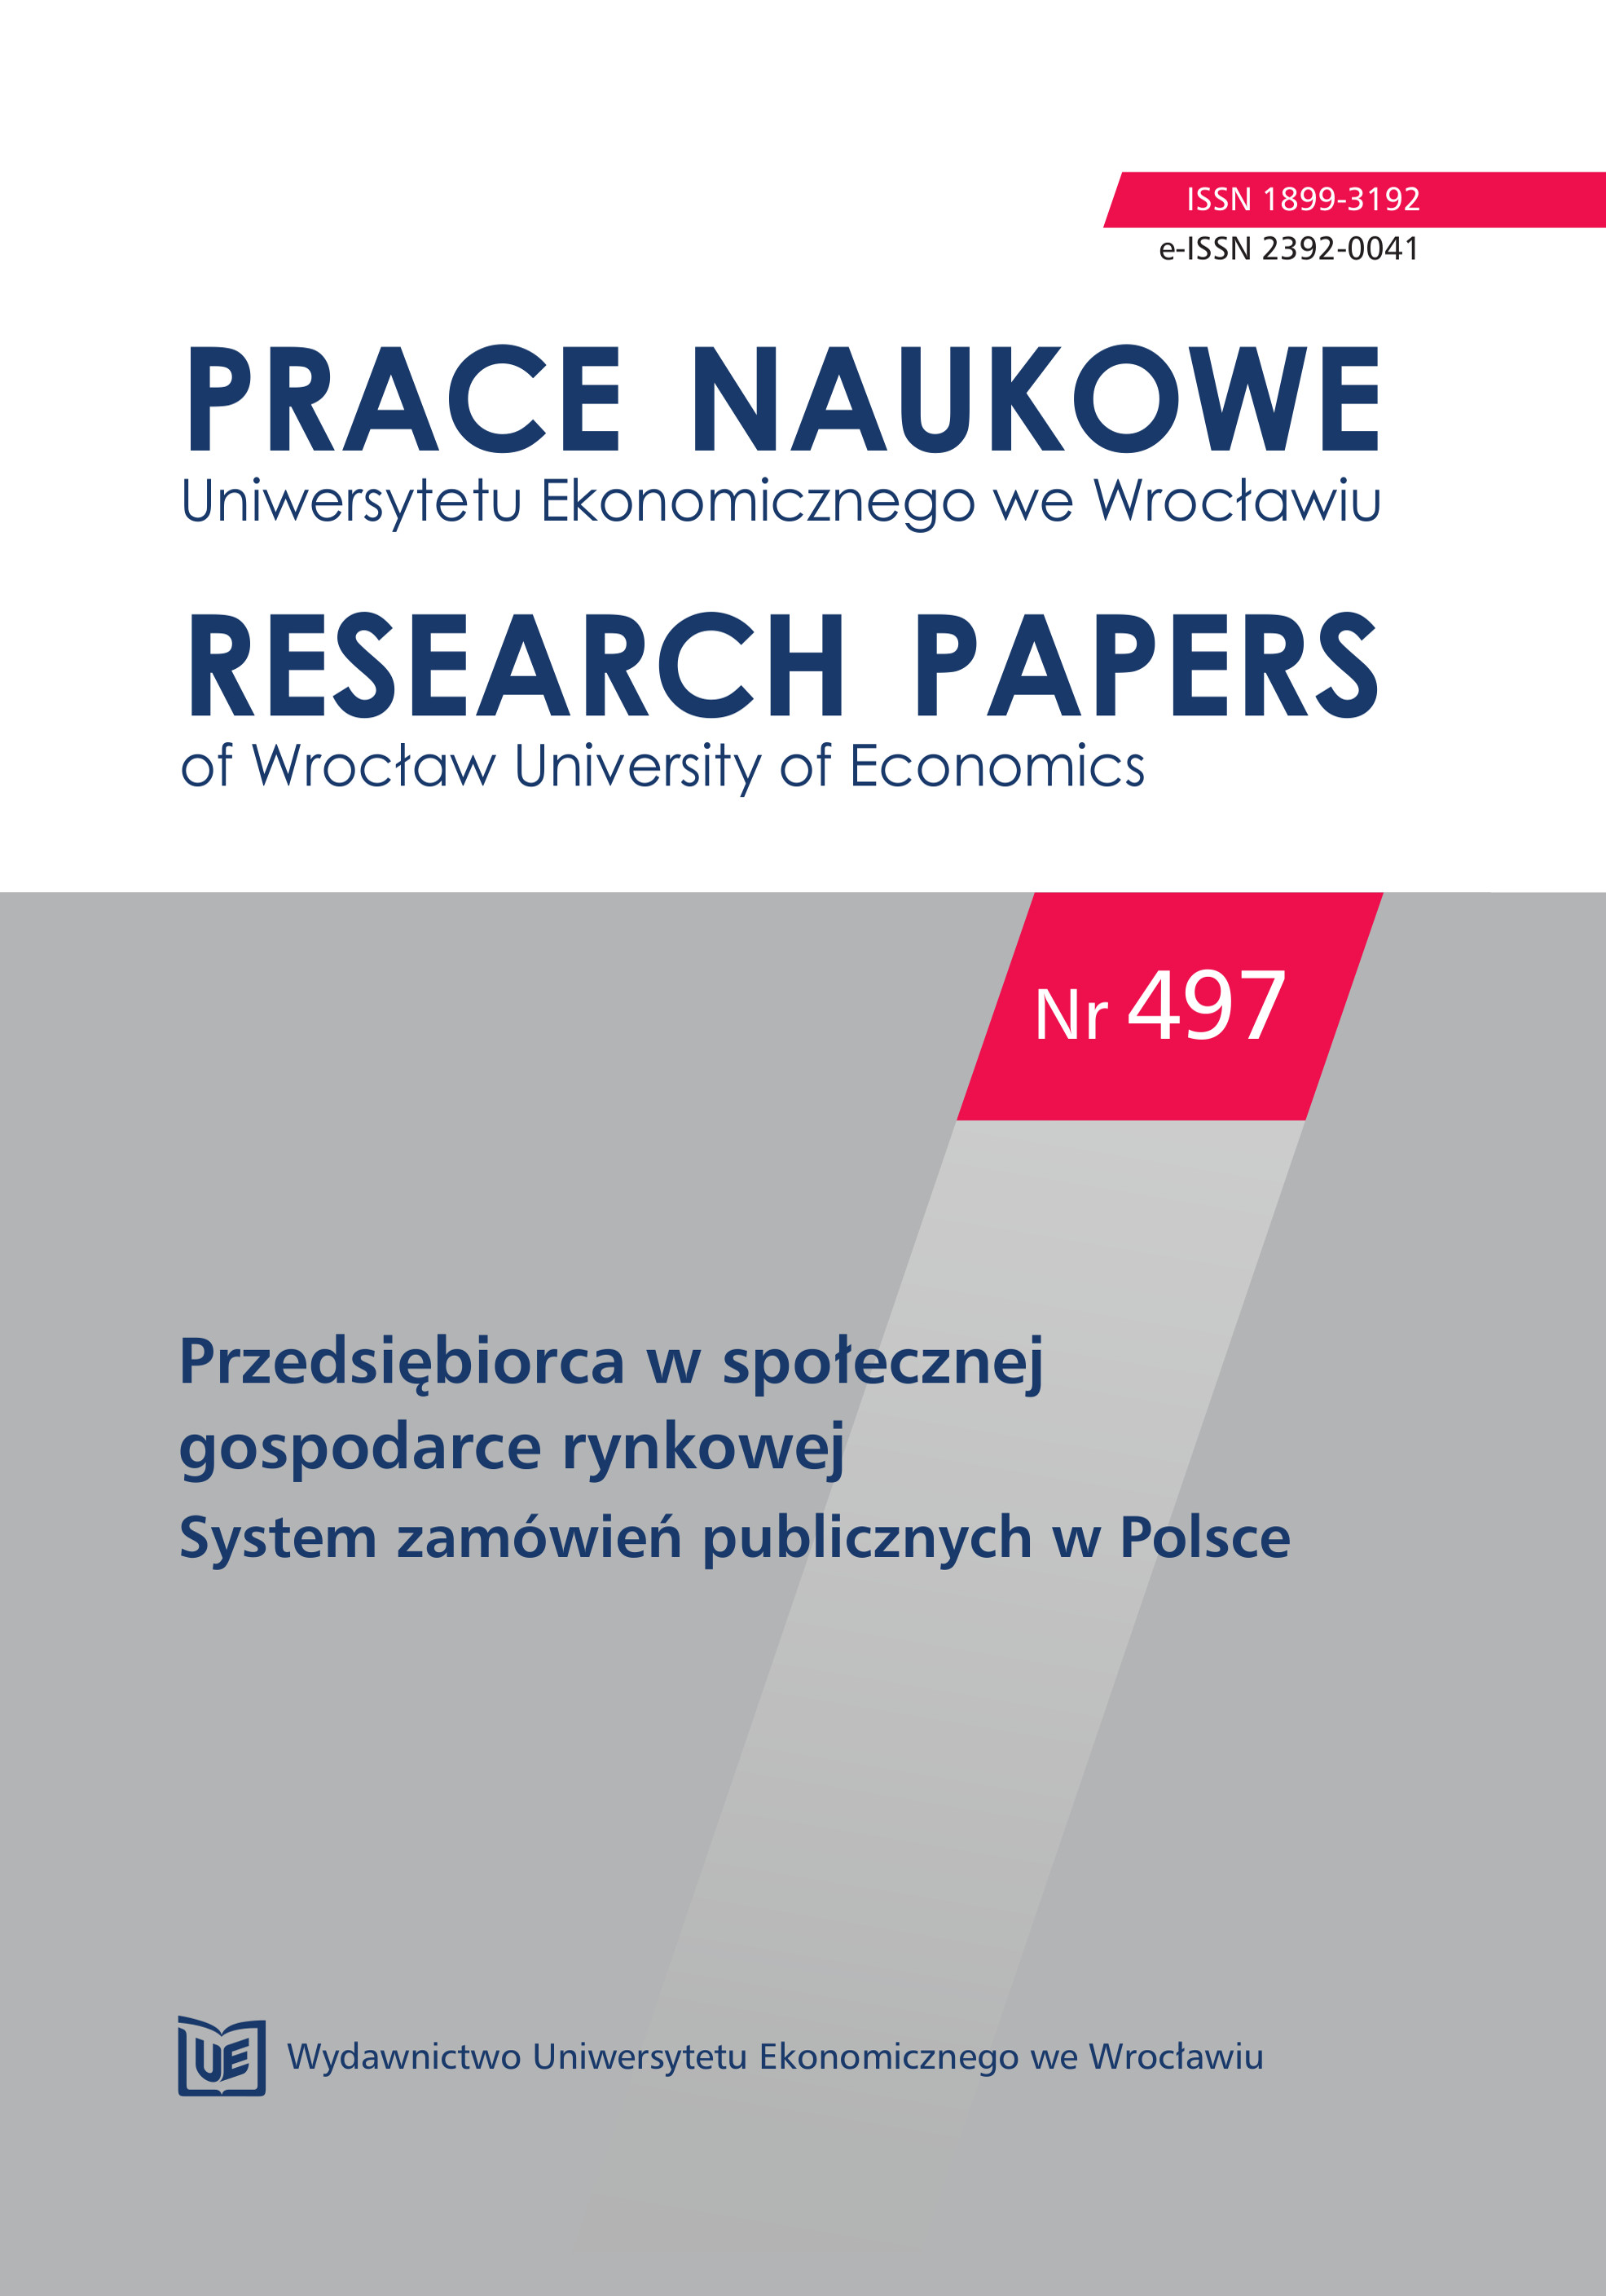 Public procurement as an instrument for shaping the economy by a state Cover Image